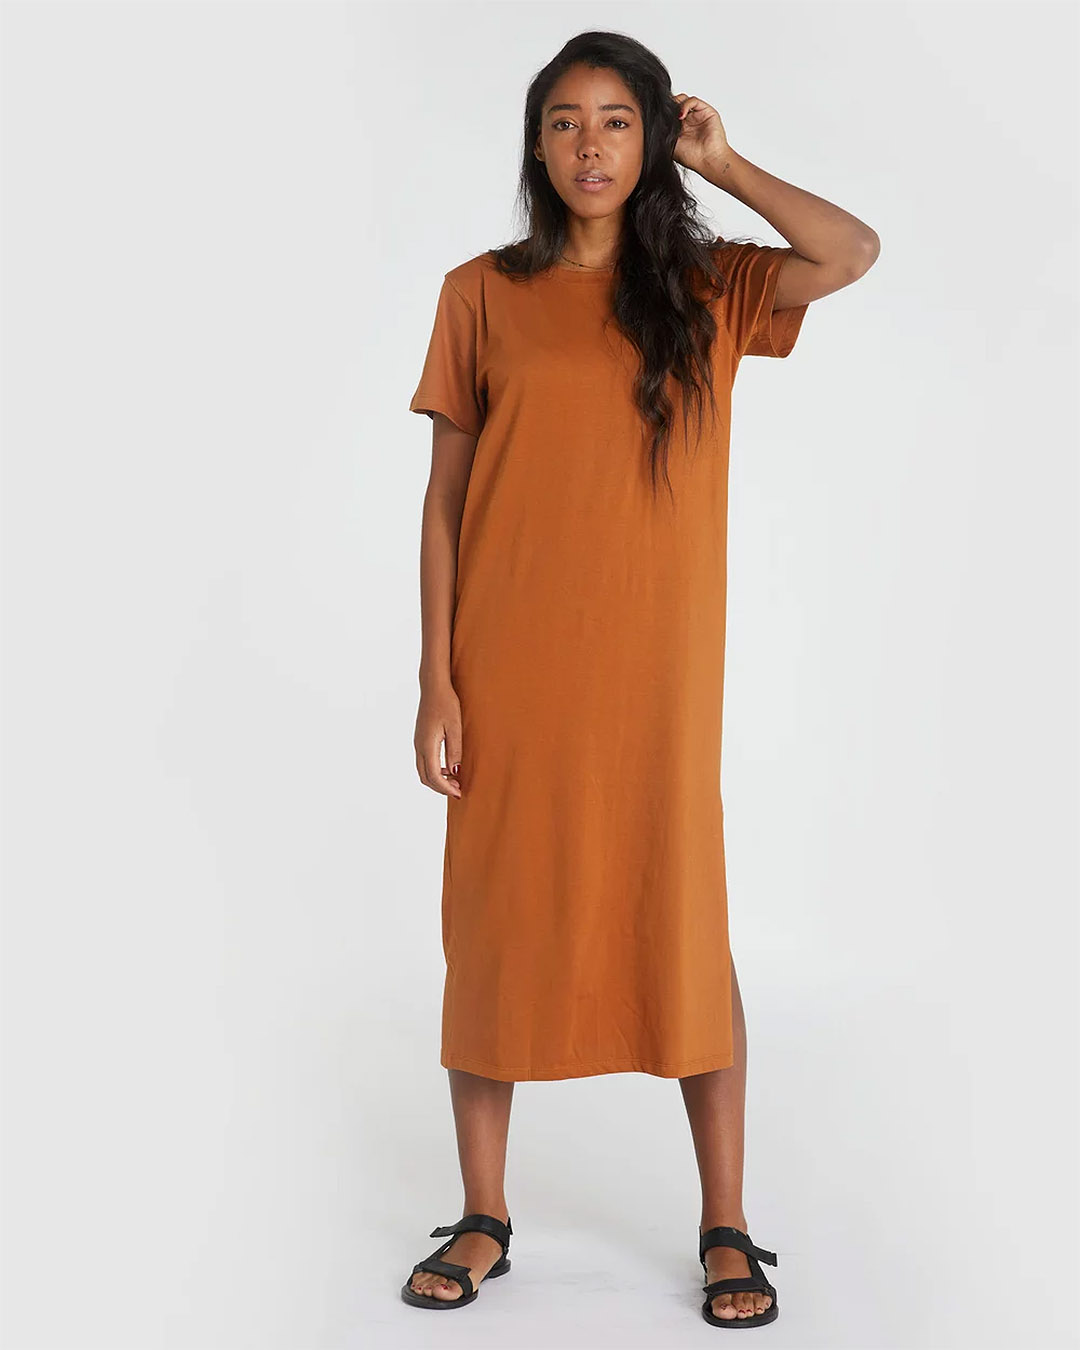 A head to toe shot of a woman wearing a burnt orange mid-length t-dress, with sandals. 